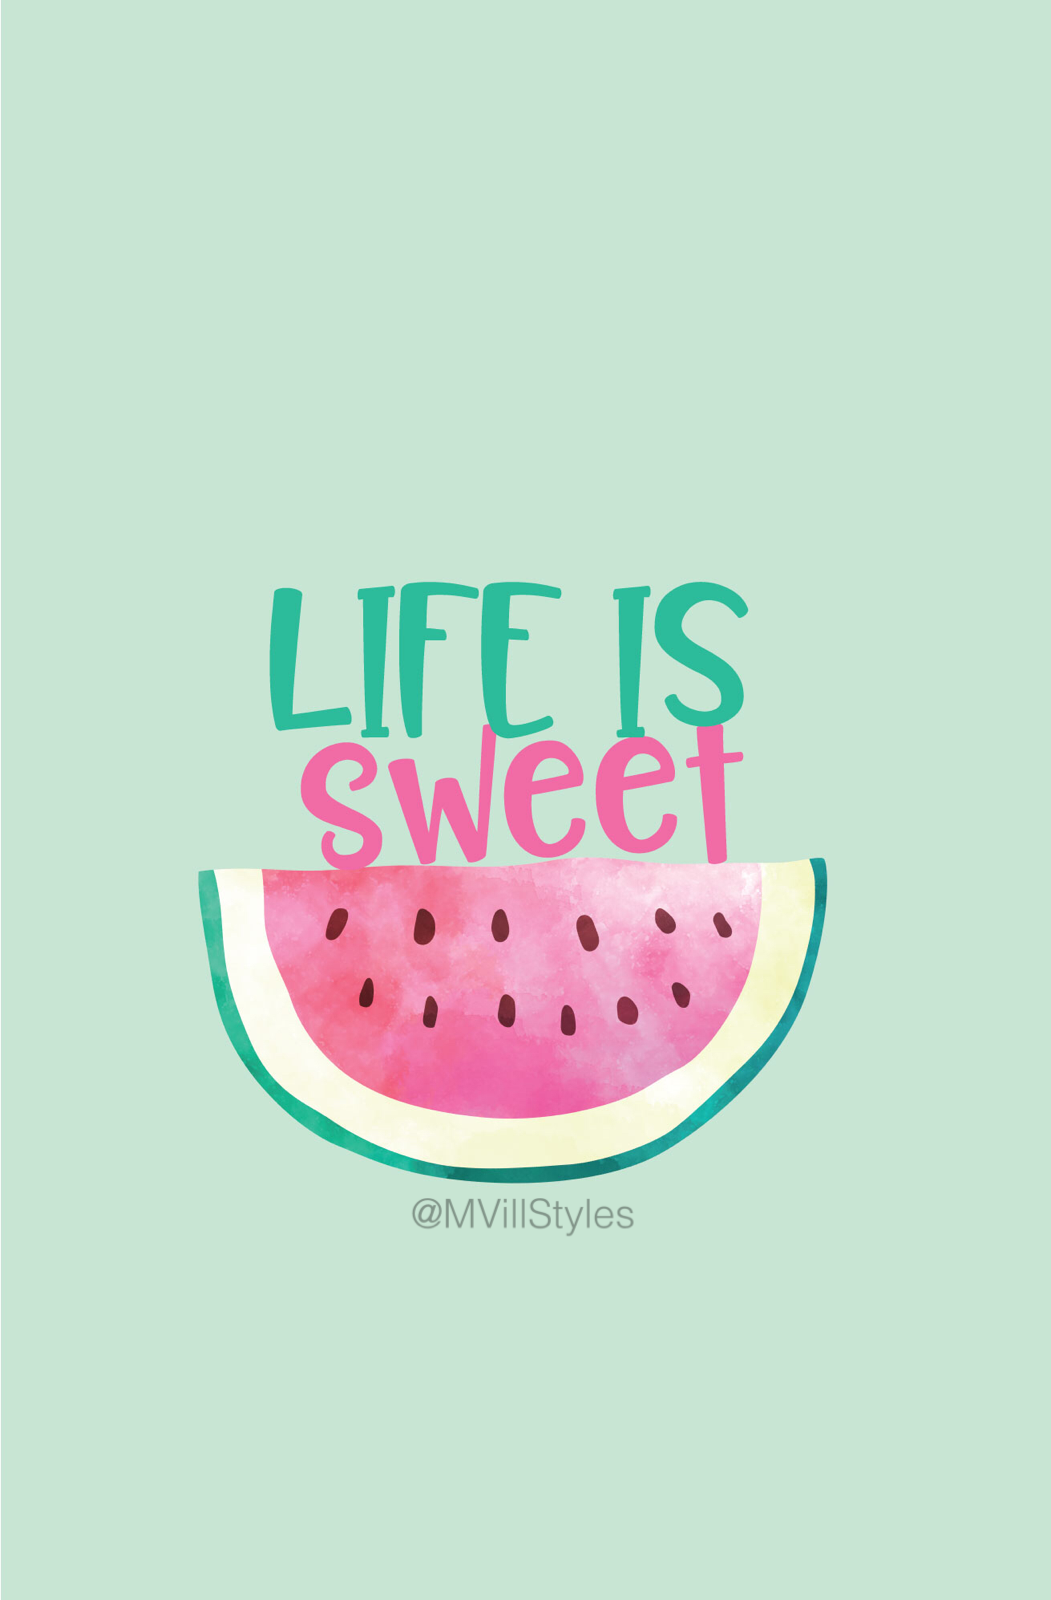 Watermelon tumblr quotes Life is sweet summer wallpaper iphone wallpaper watermelon